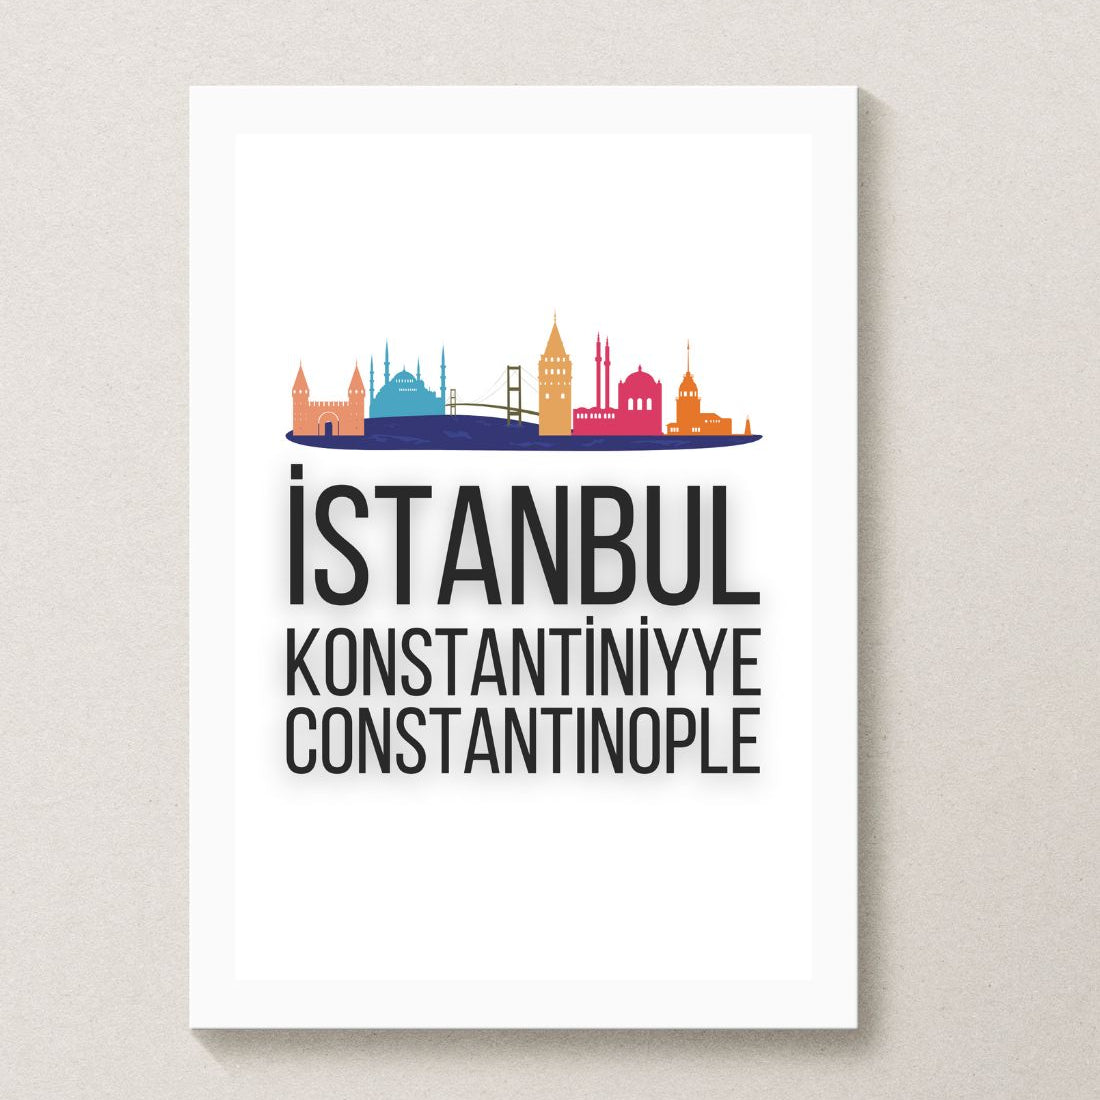 turkey posters - istanbul constantinople